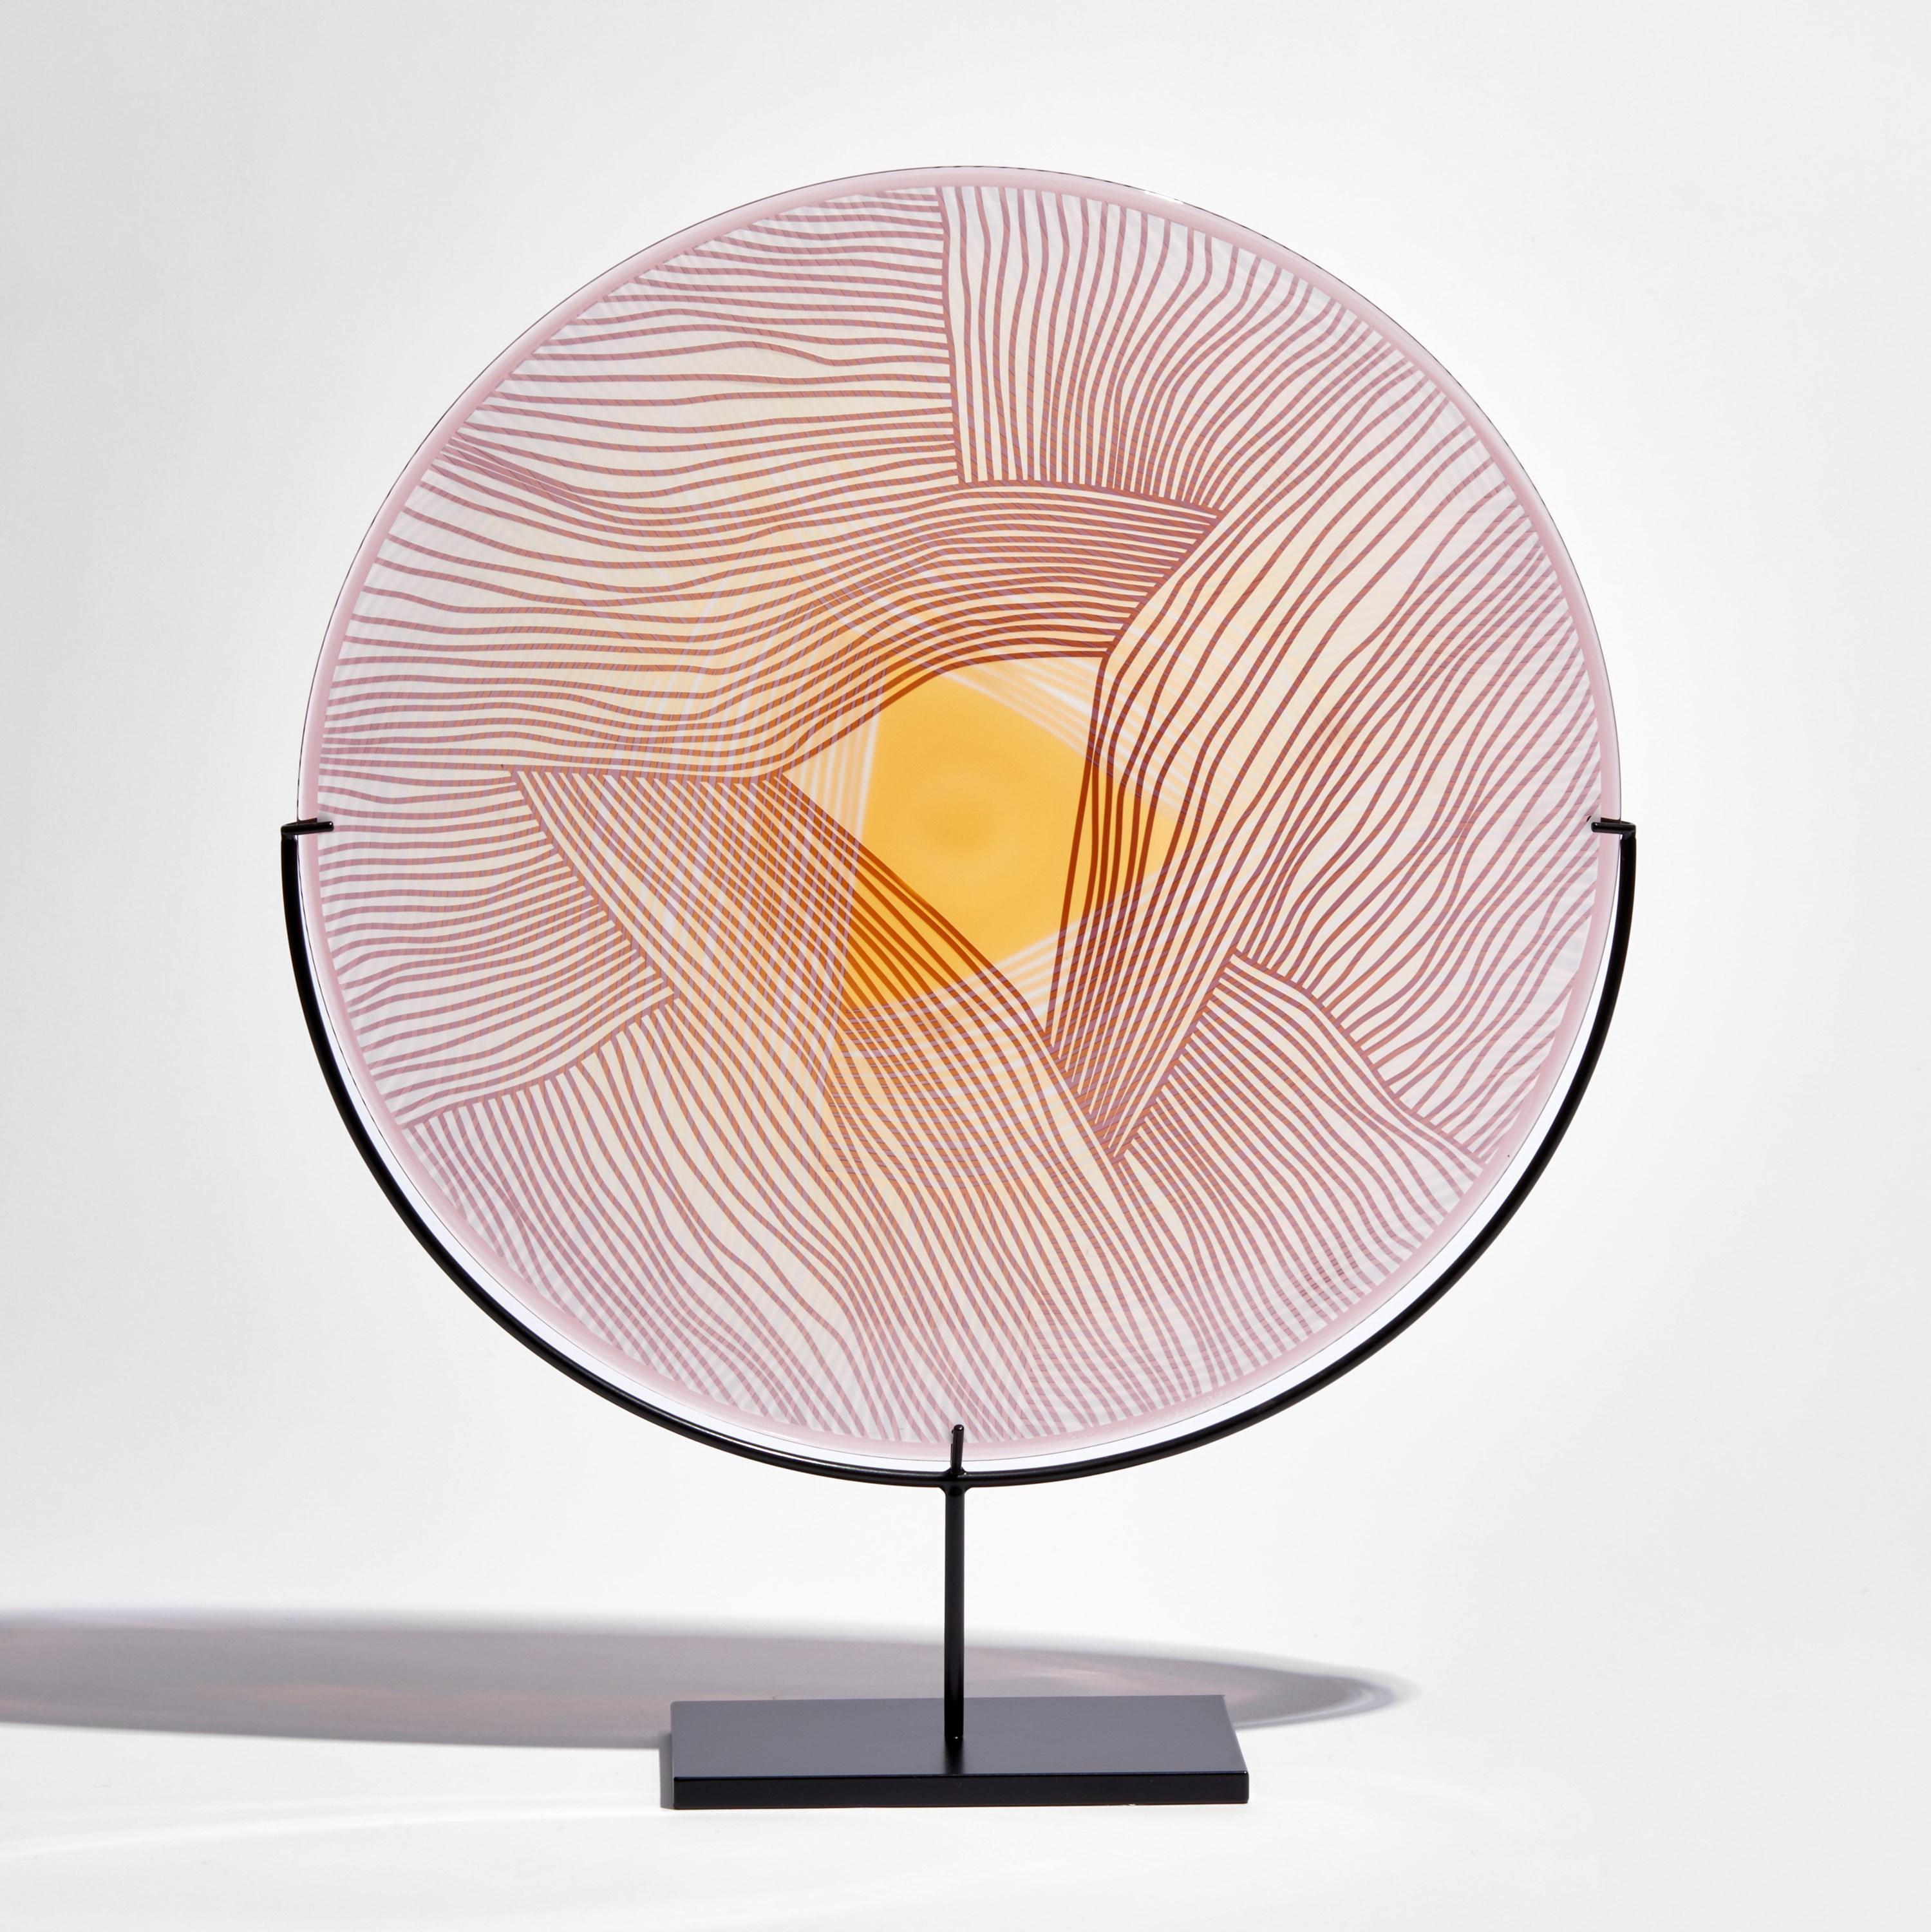 Autumn Landscape is a unique golden yellow and dusky pink hand blown and etched glass sculptural plate by the British artist Kate Jones, with a painted steel base.

Created with Stephen Gillies, with whom Jones makes many works in collaboration,